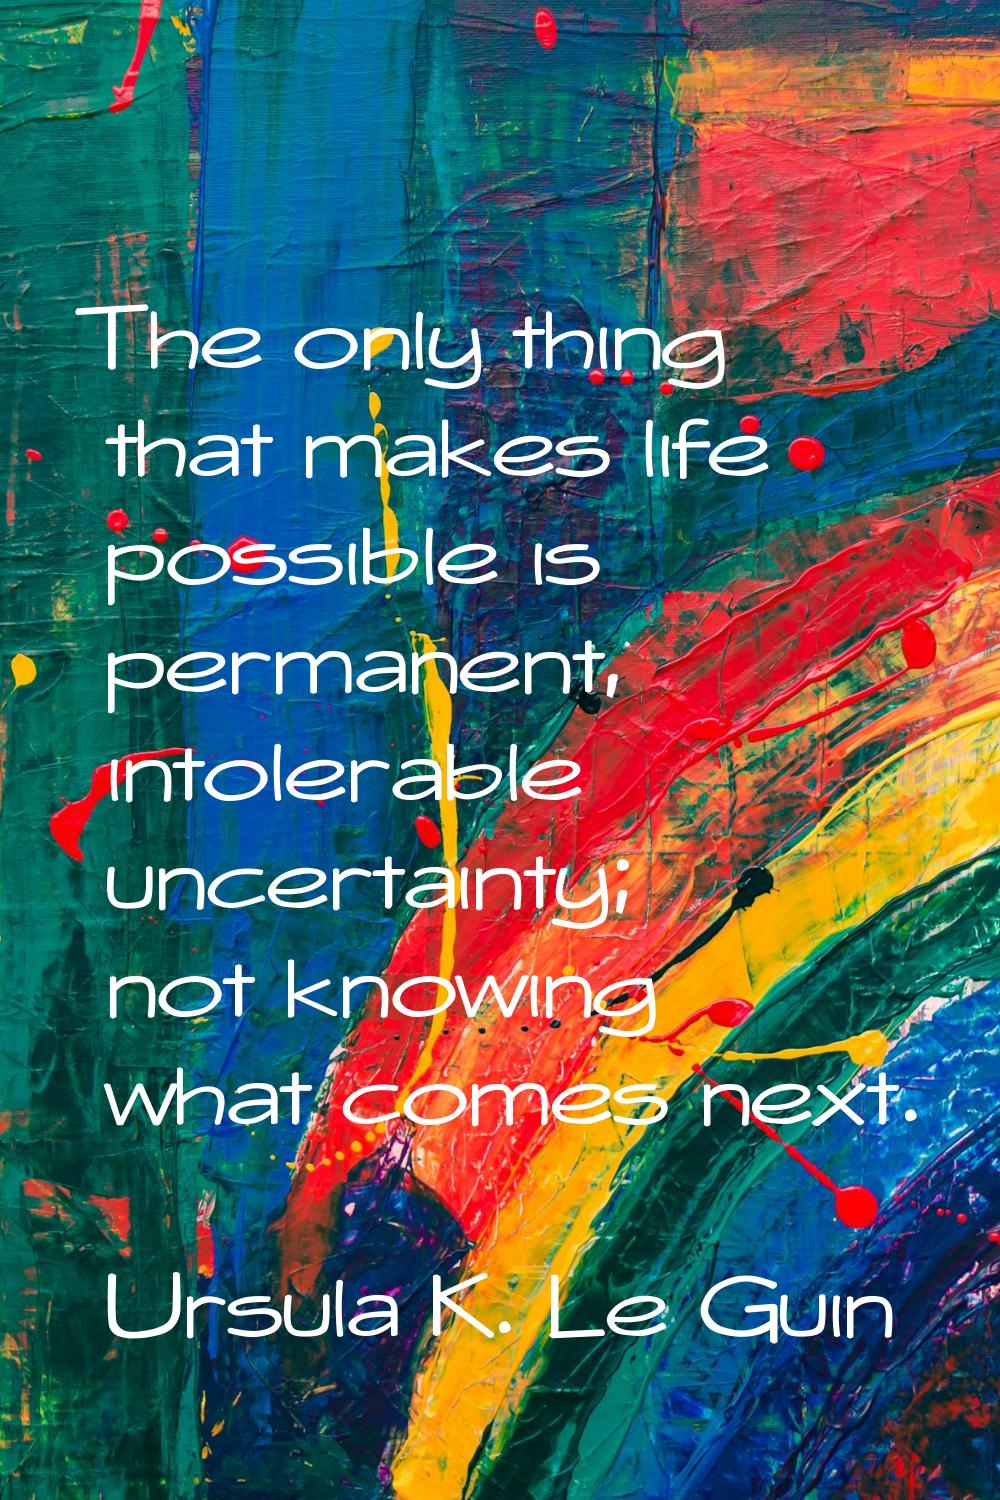 The only thing that makes life possible is permanent, intolerable uncertainty; not knowing what com